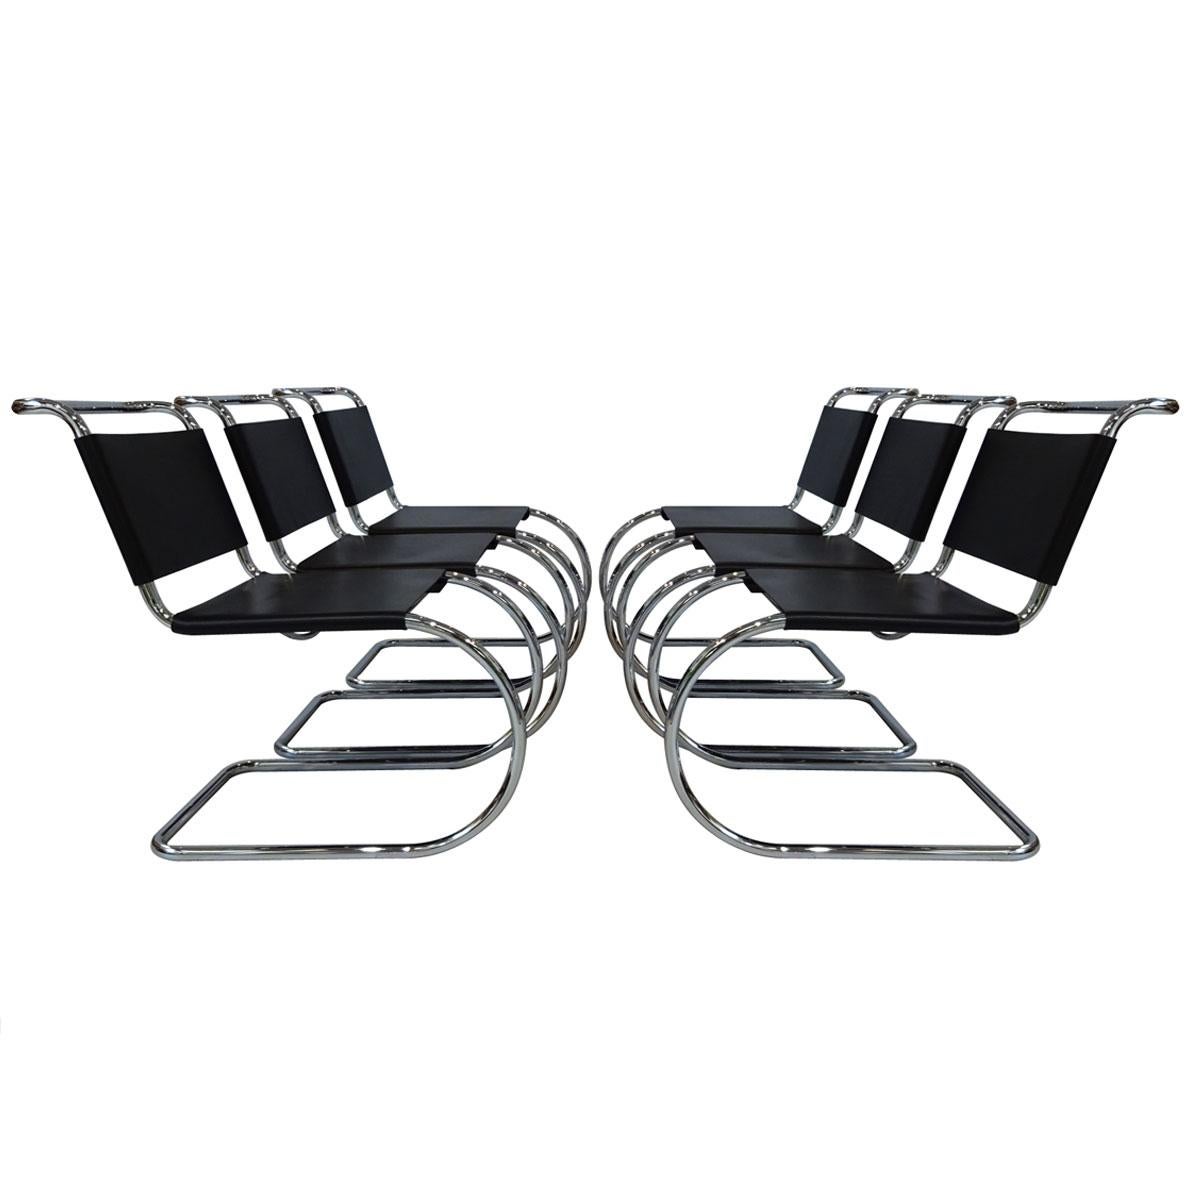 Le Corbusier LC6 and Mies van der Rohe MR10 Dining Set by Cassina and Knoll 1